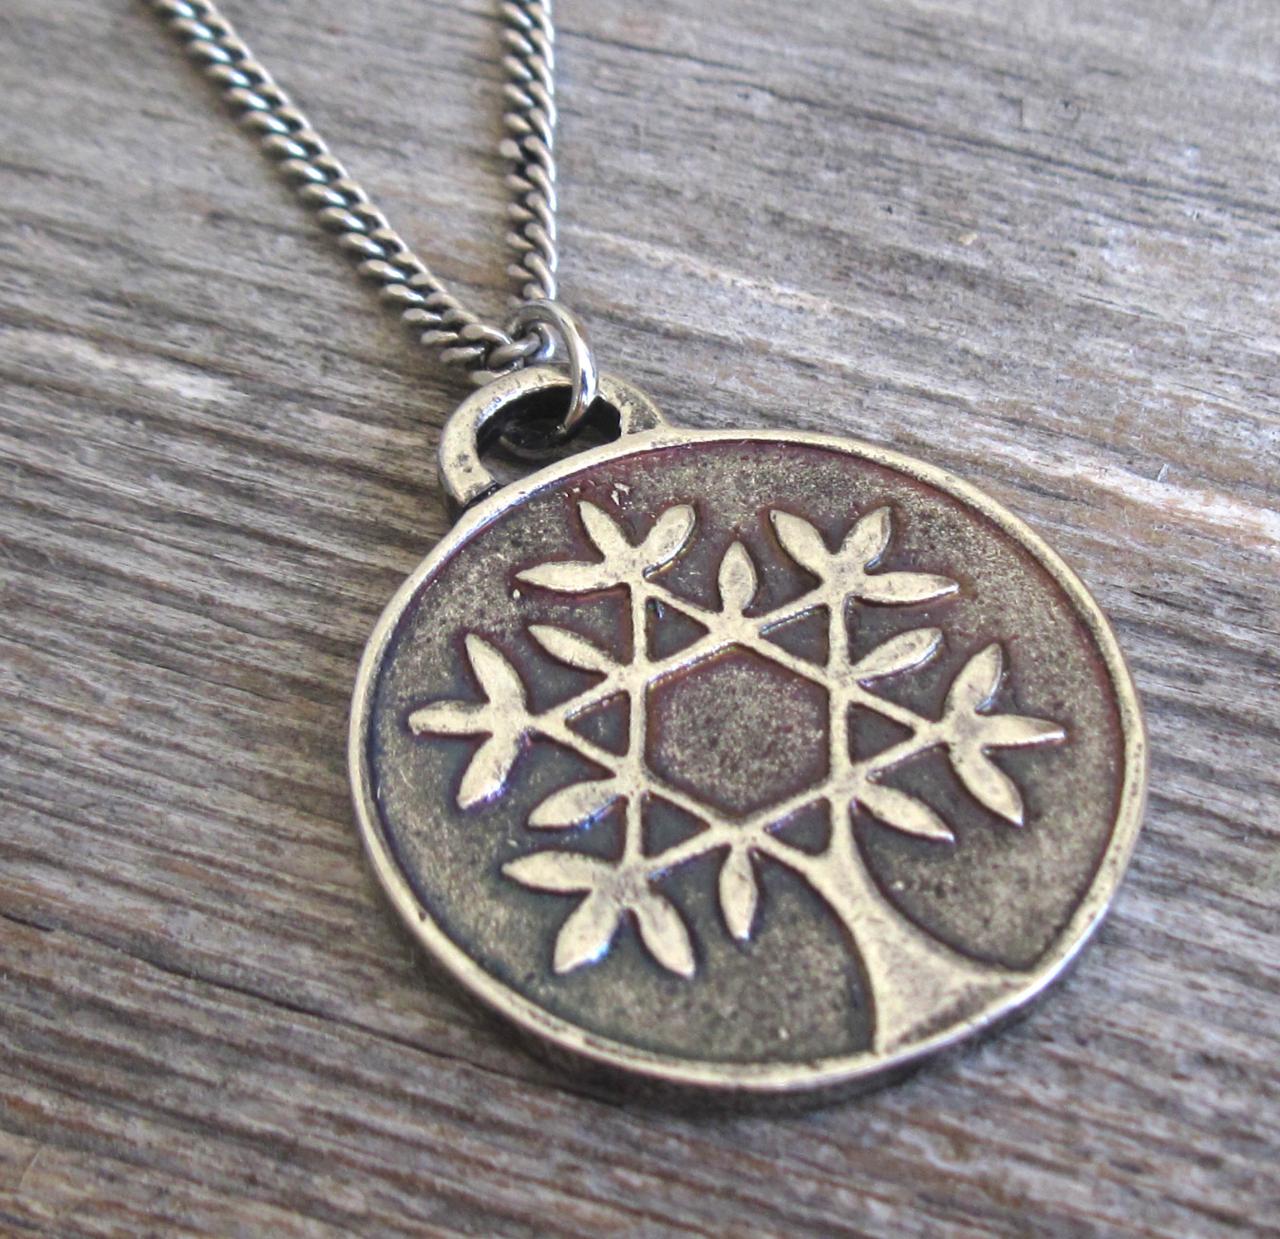 Men's Necklace - Men's Tree Of Life Necklace - Men's Silver Necklace - Mens Jewelry - Necklaces For Men - Jewelry For